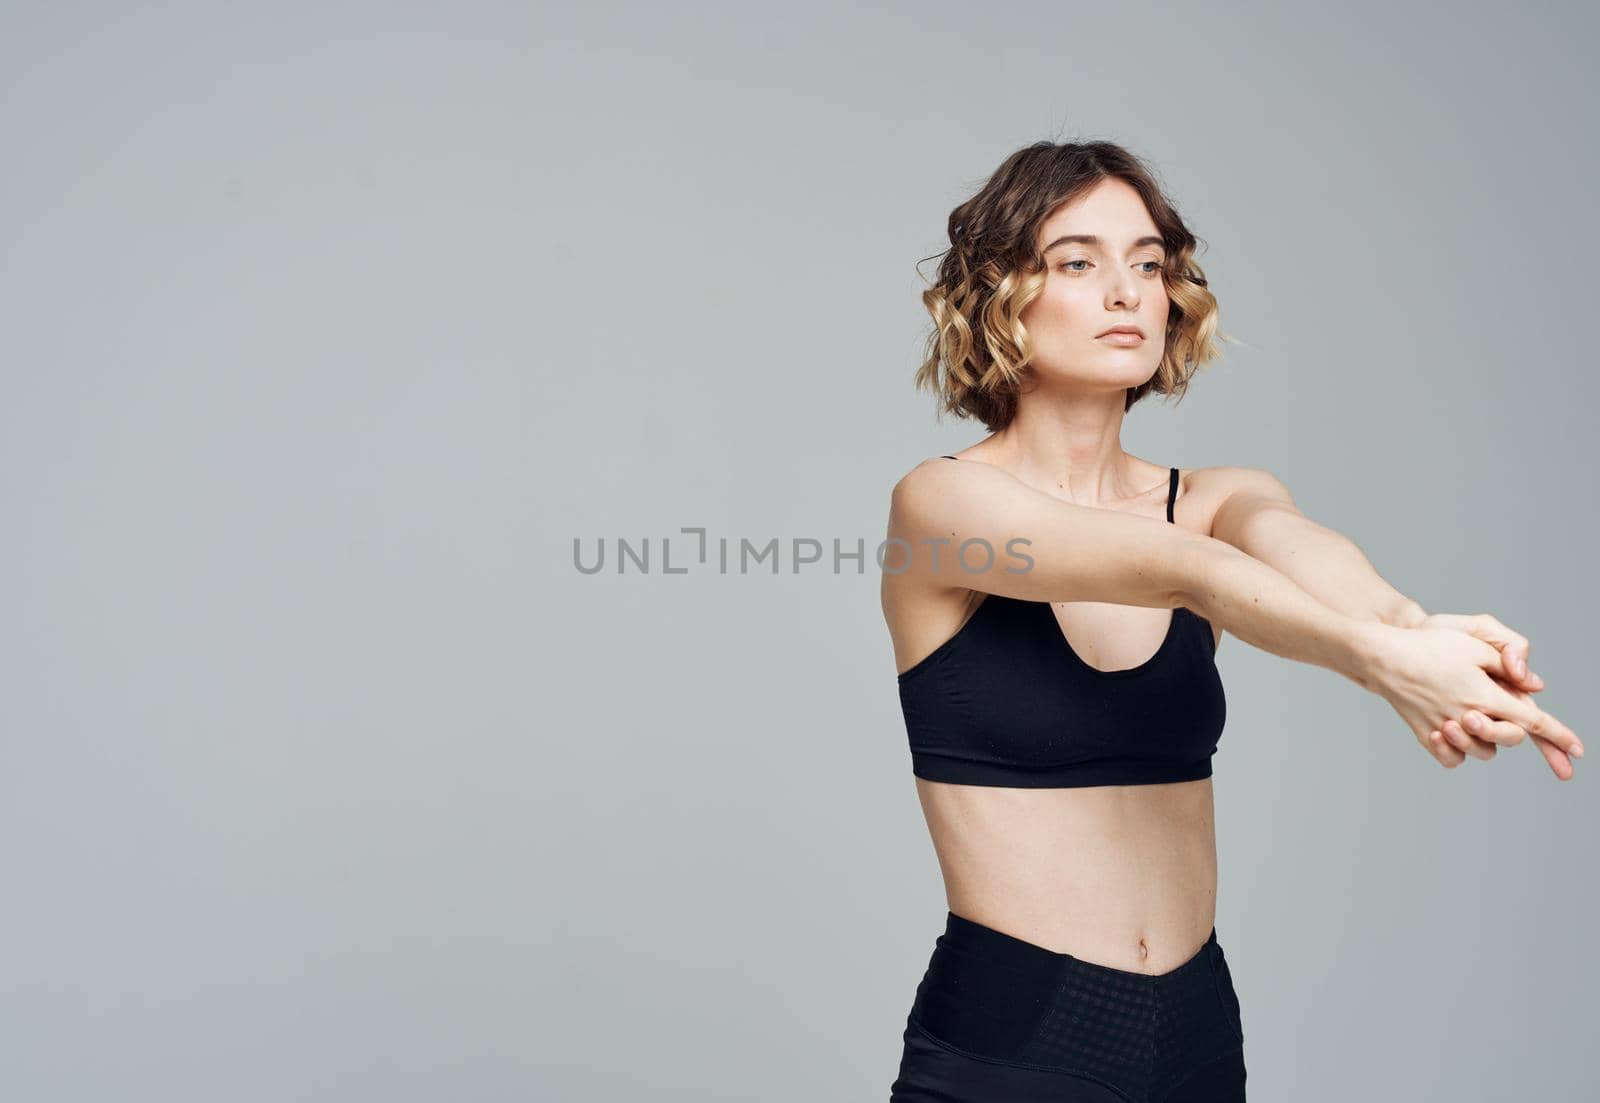 A woman in dark sportswear on a gray background gestures with her hands by SHOTPRIME